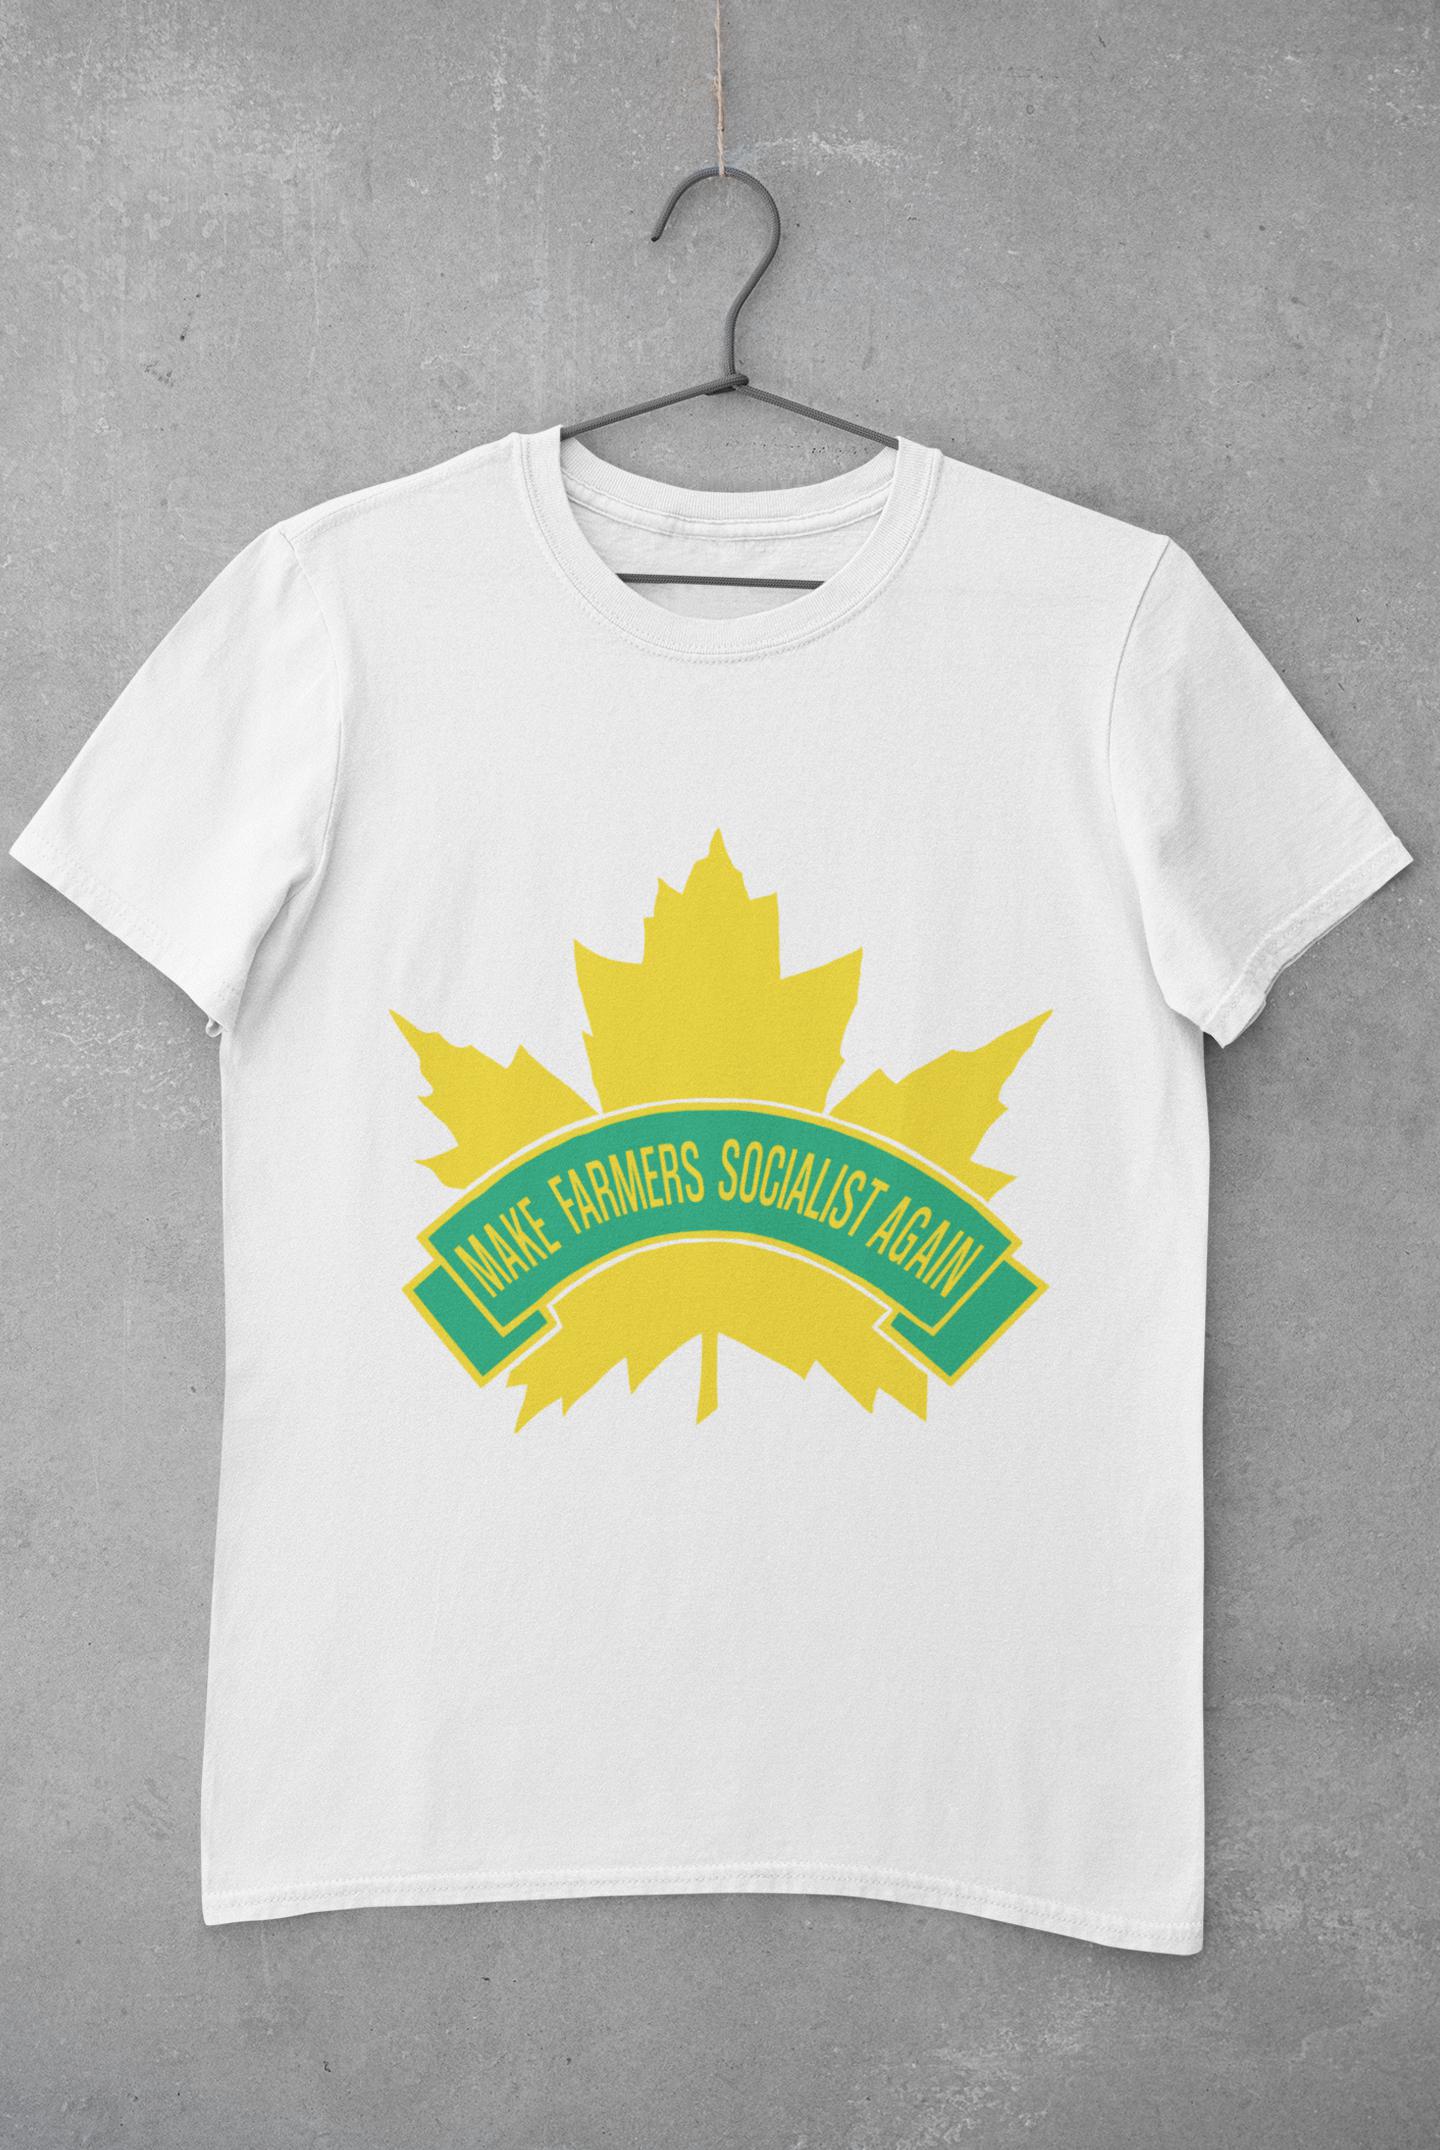 White Tee-Shirt on a hanger, with a the old CCF (Canadian Commonwealth Federation) logo reading "make farmers socialist again"